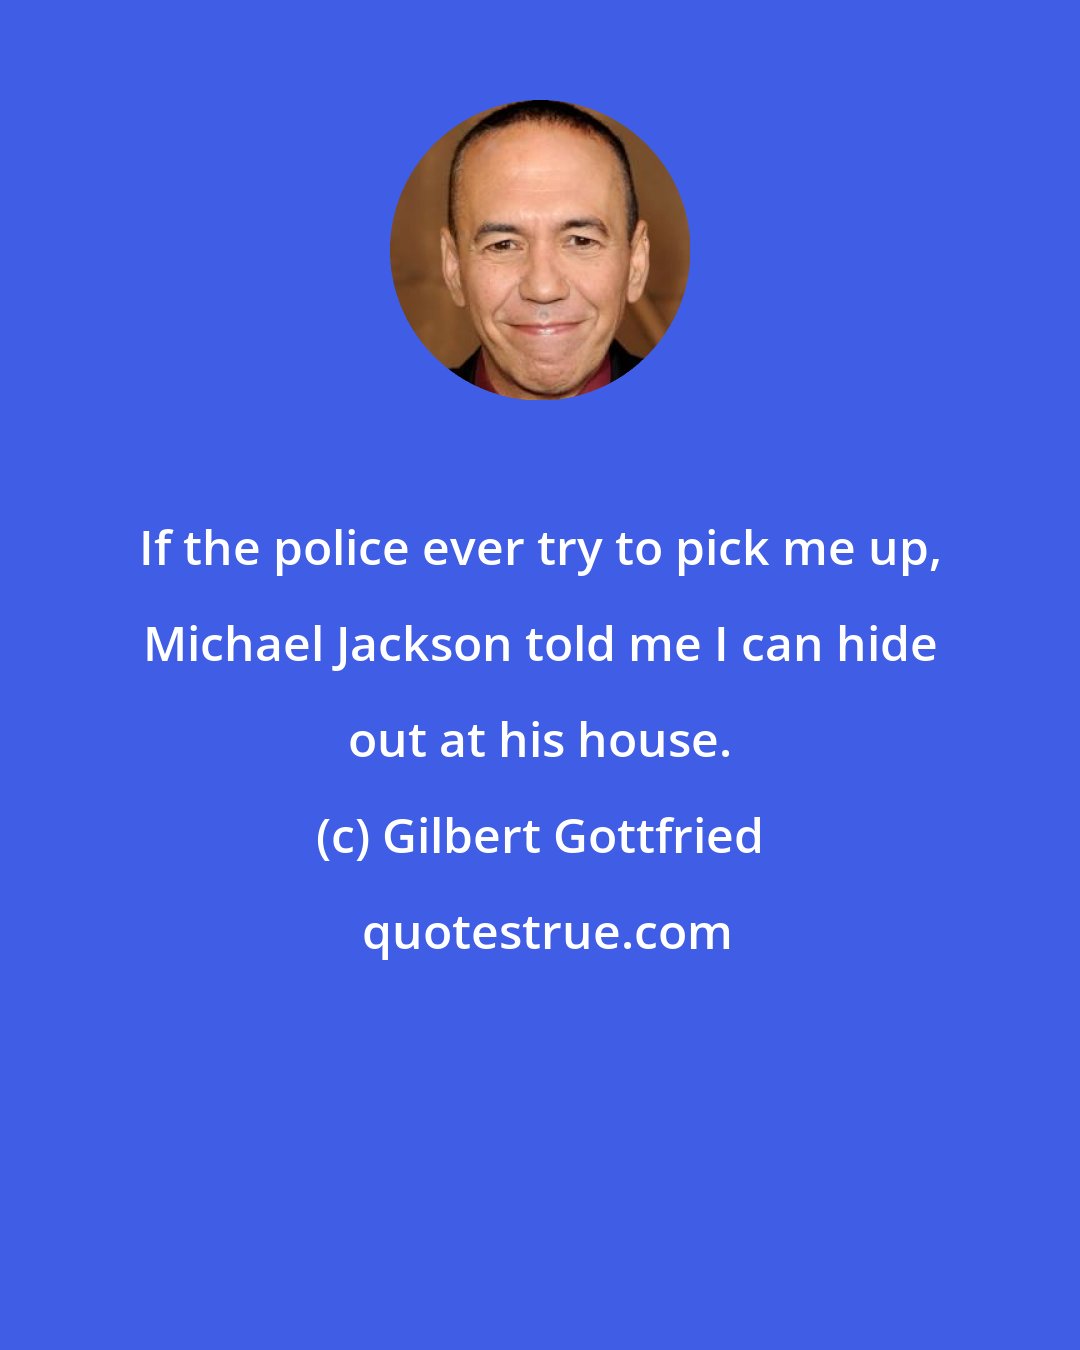 Gilbert Gottfried: If the police ever try to pick me up, Michael Jackson told me I can hide out at his house.